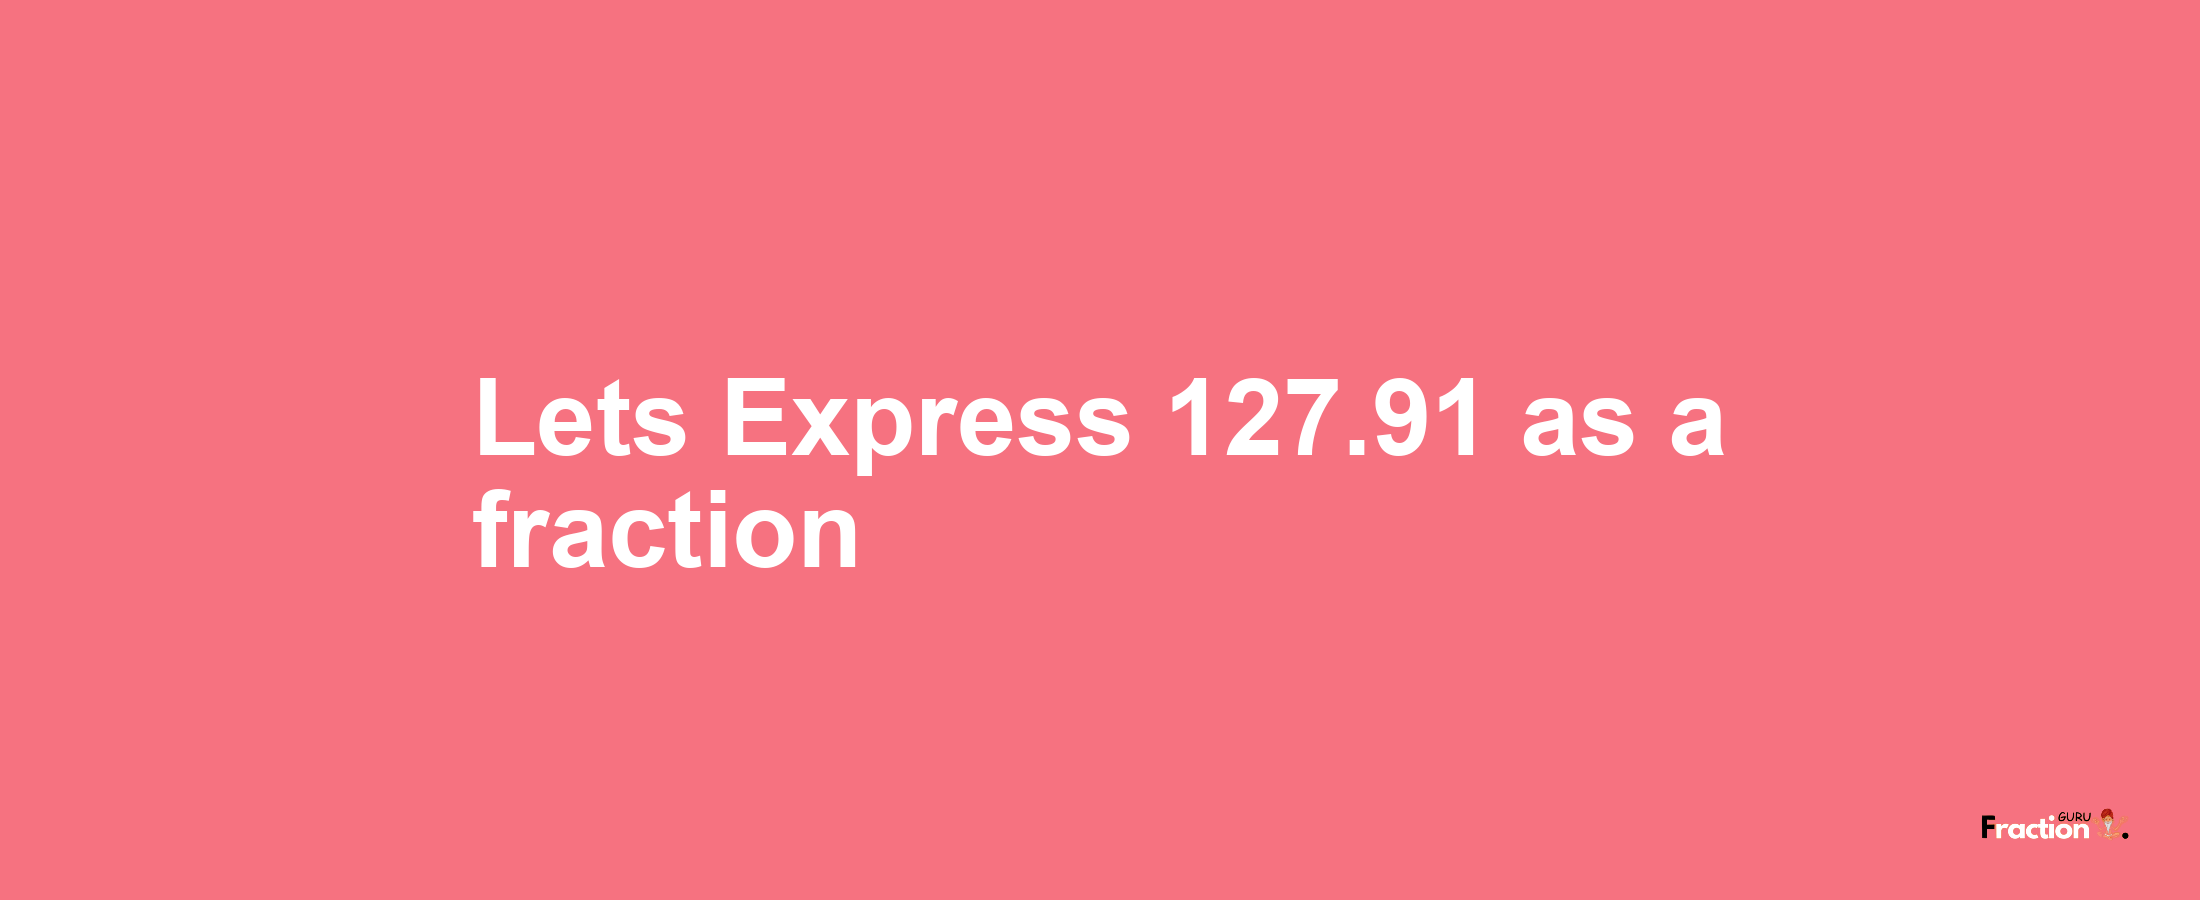 Lets Express 127.91 as afraction